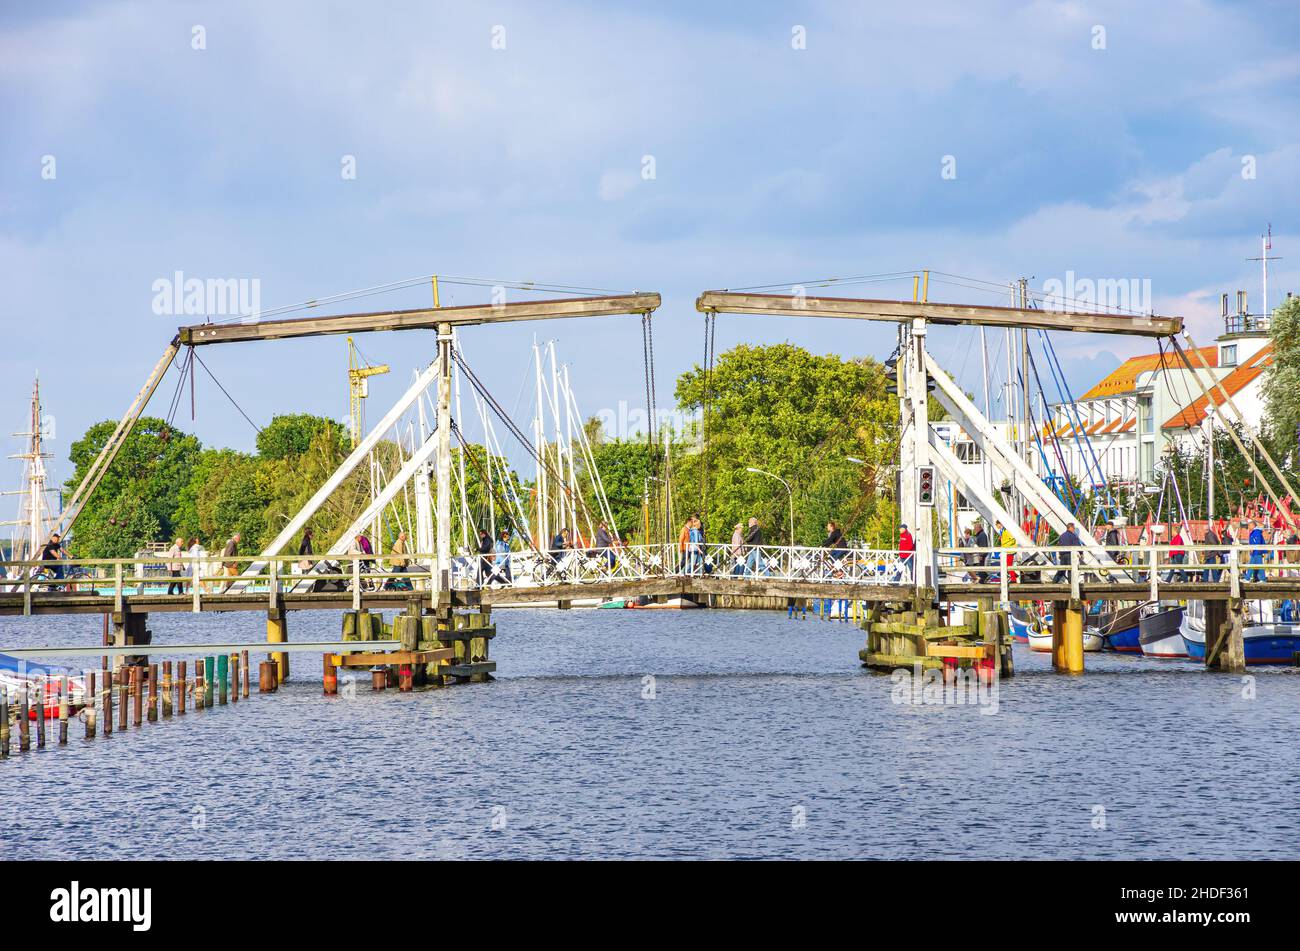 Picturesque view of the old Wieck wooden bascule bridge over the river Ryck, Greifswald-Wieck city harbour, Hanseatic City of Greifswald, Germany. Stock Photo